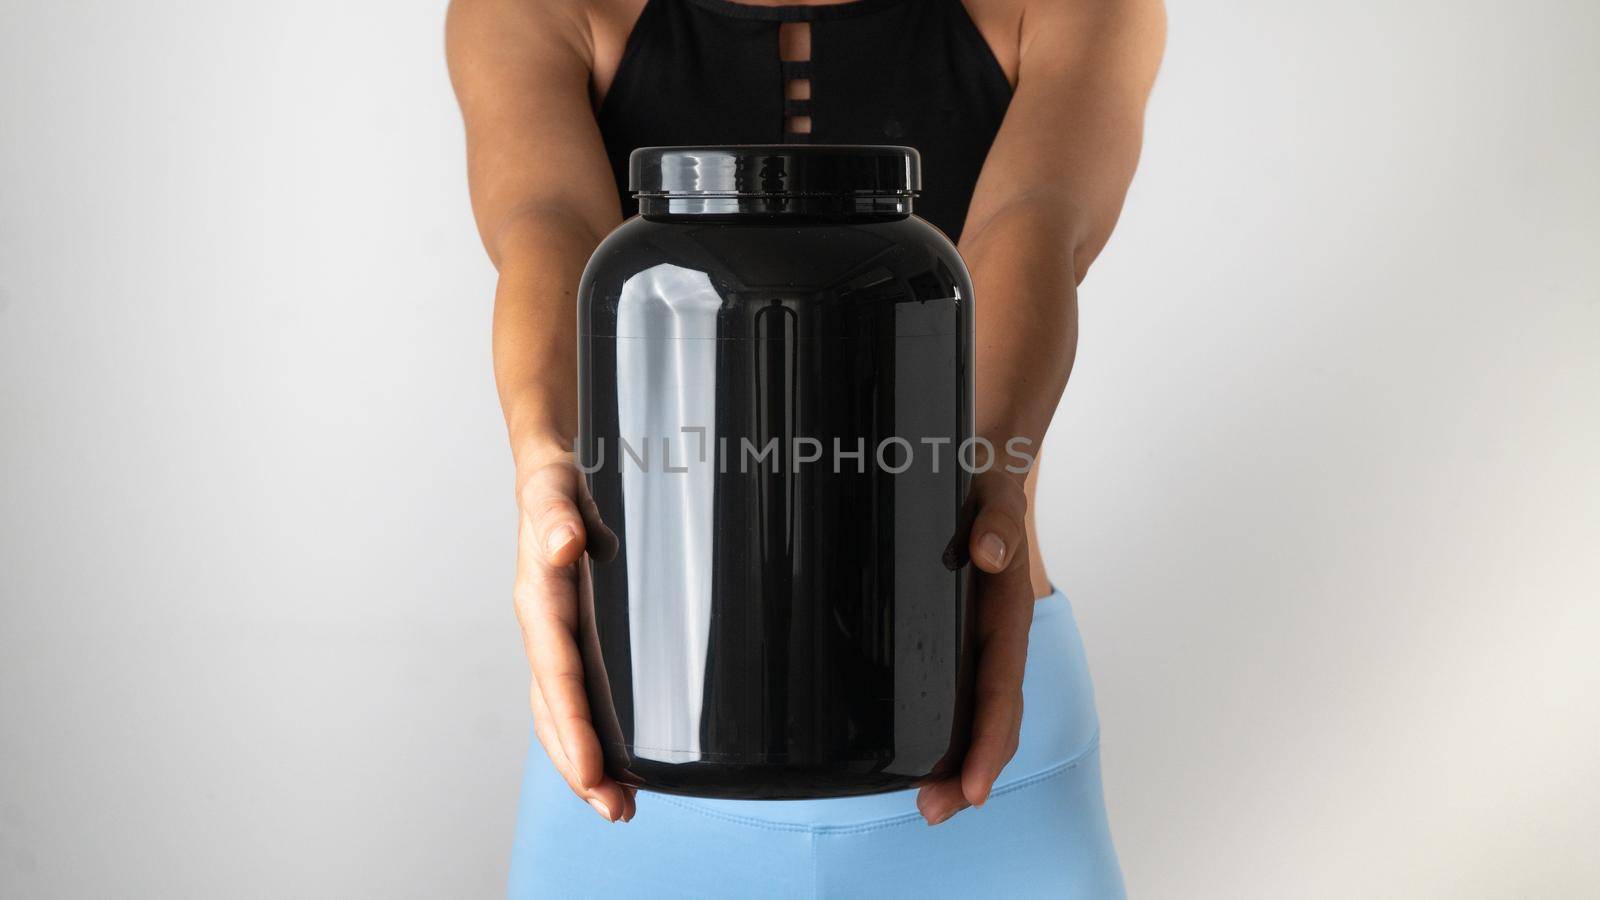 Women's hands hold a large can of sports nutrition, useful supplements for training. High quality photo